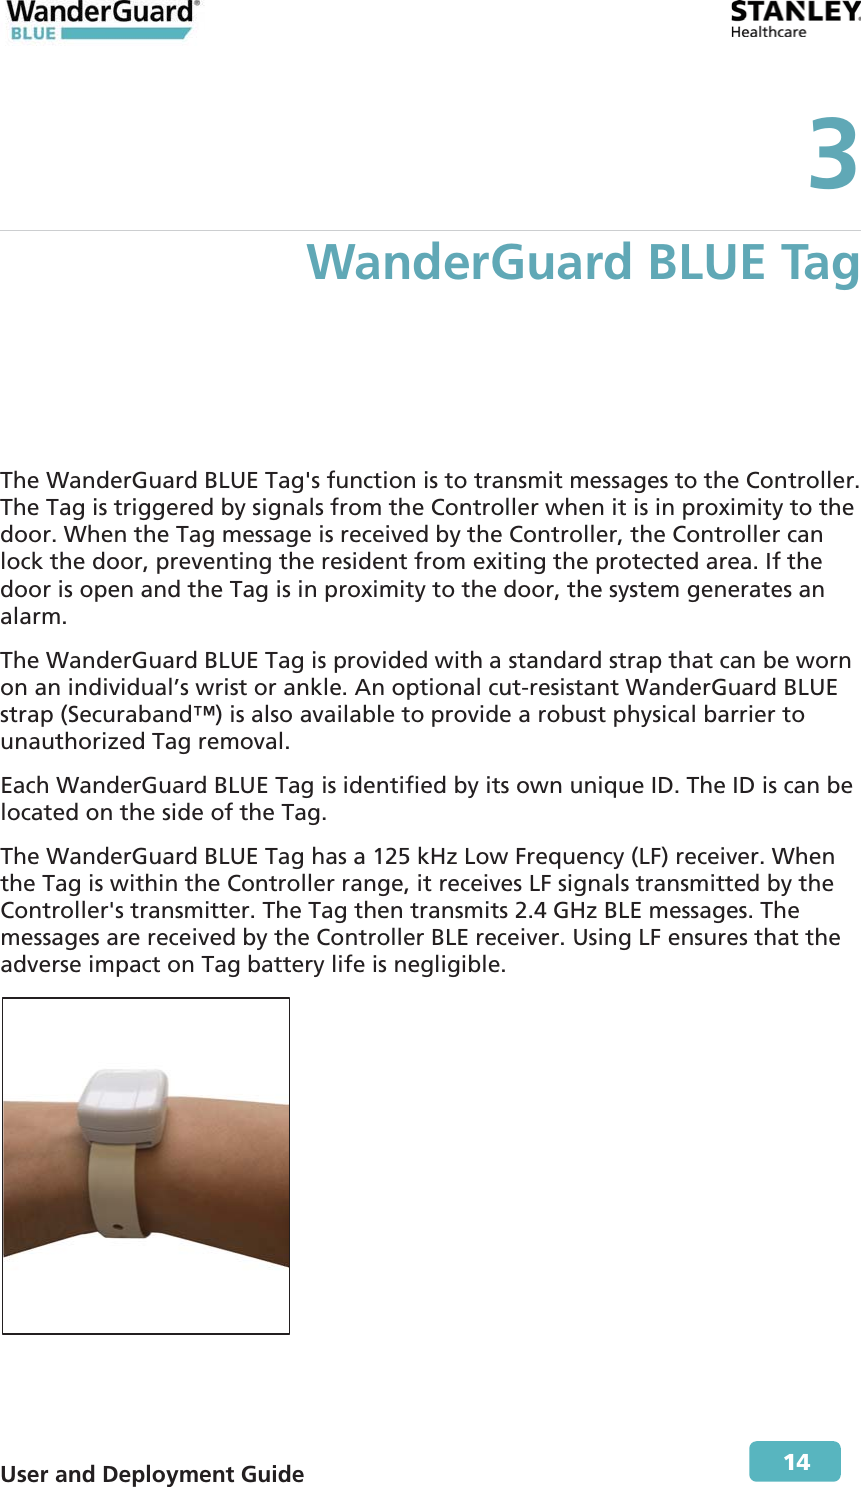  User and Deployment Guide        14 3 WanderGuard BLUE Tag The WanderGuard BLUE Tag&apos;s function is to transmit messages to the Controller. The Tag is triggered by signals from the Controller when it is in proximity to the door. When the Tag message is received by the Controller, the Controller can lock the door, preventing the resident from exiting the protected area. If the door is open and the Tag is in proximity to the door, the system generates an alarm. The WanderGuard BLUE Tag is provided with a standard strap that can be worn on an individual’s wrist or ankle. An optional cut-resistant WanderGuard BLUE strap (Securaband™) is also available to provide a robust physical barrier to unauthorized Tag removal. Each WanderGuard BLUE Tag is identified by its own unique ID. The ID is can be located on the side of the Tag. The WanderGuard BLUE Tag has a 125 kHz Low Frequency (LF) receiver. When the Tag is within the Controller range, it receives LF signals transmitted by the Controller&apos;s transmitter. The Tag then transmits 2.4 GHz BLE messages. The messages are received by the Controller BLE receiver. Using LF ensures that the adverse impact on Tag battery life is negligible.  